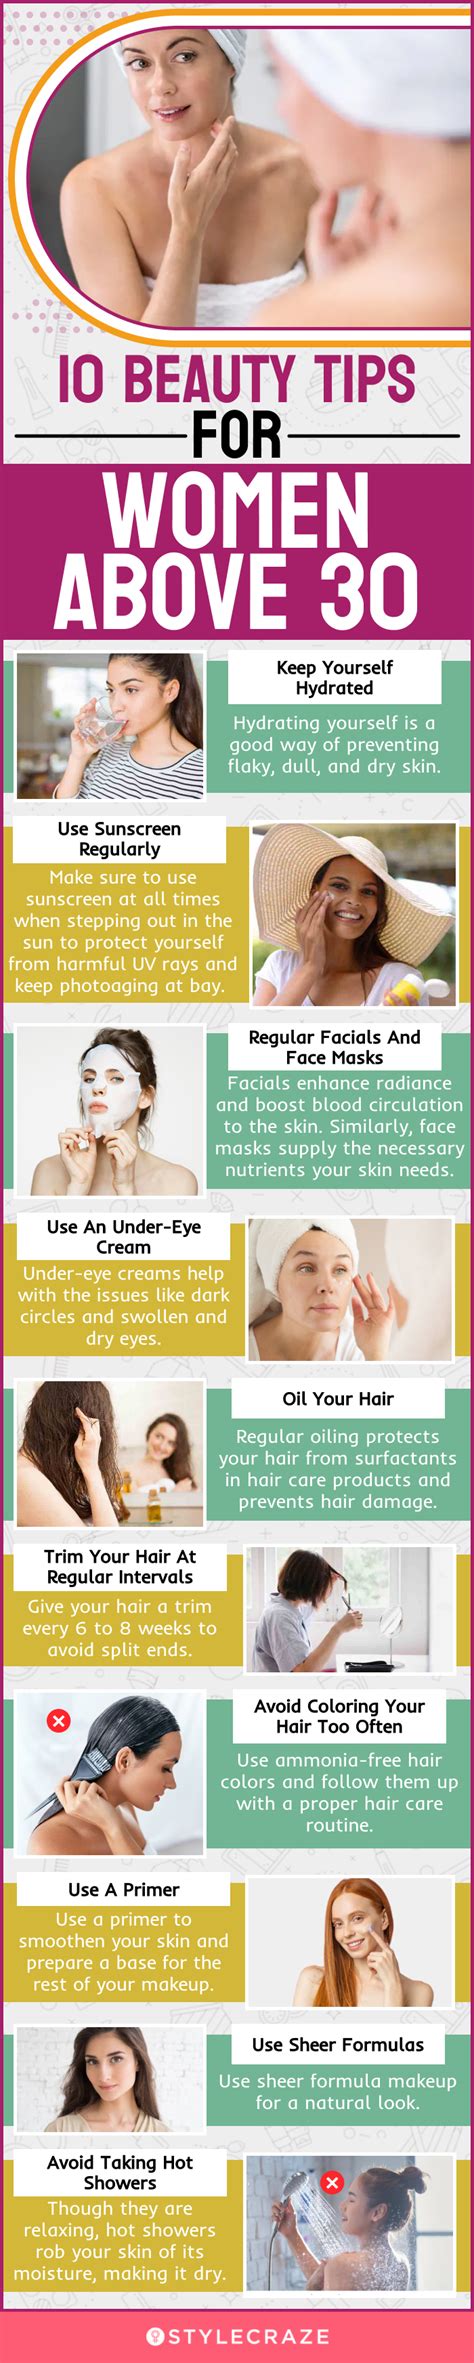 Top Beauty Tips For Women Over